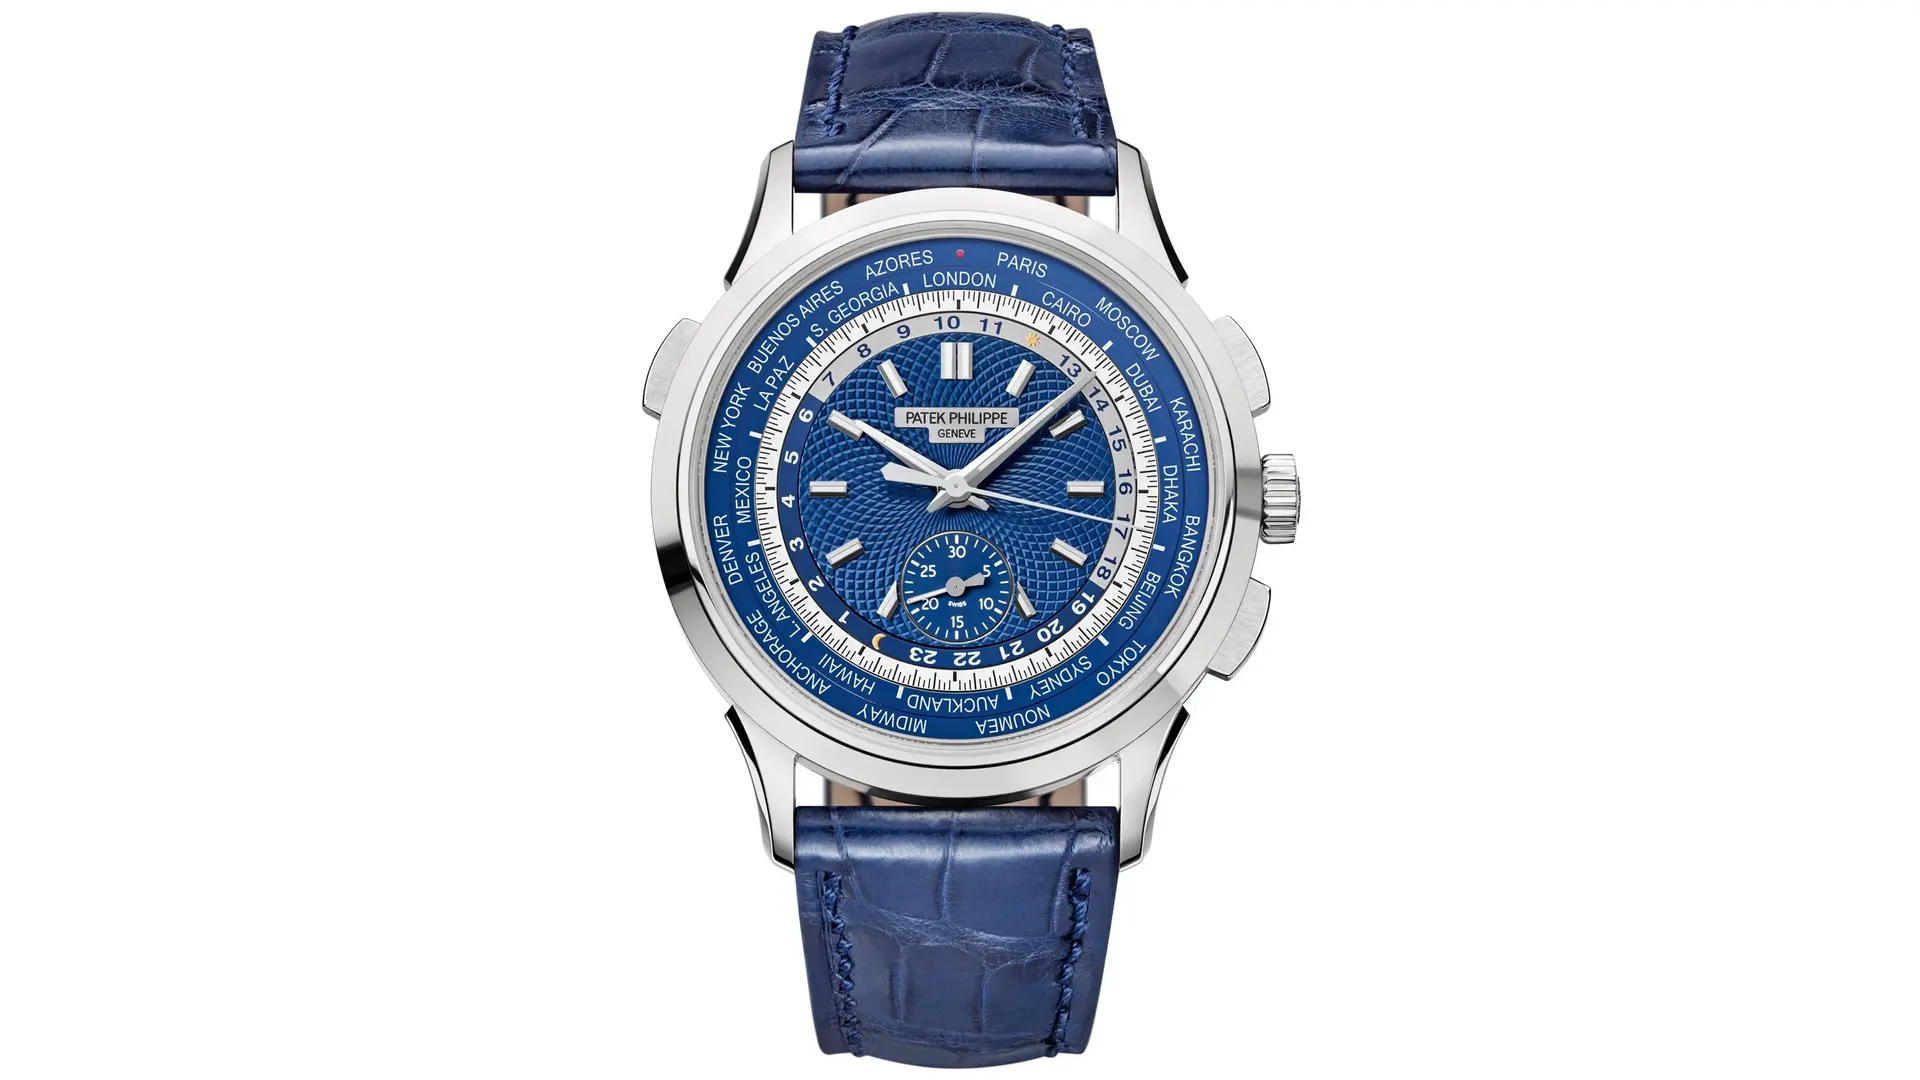 Lifestyle Articles - Ten of the Best Travel Watches - 9